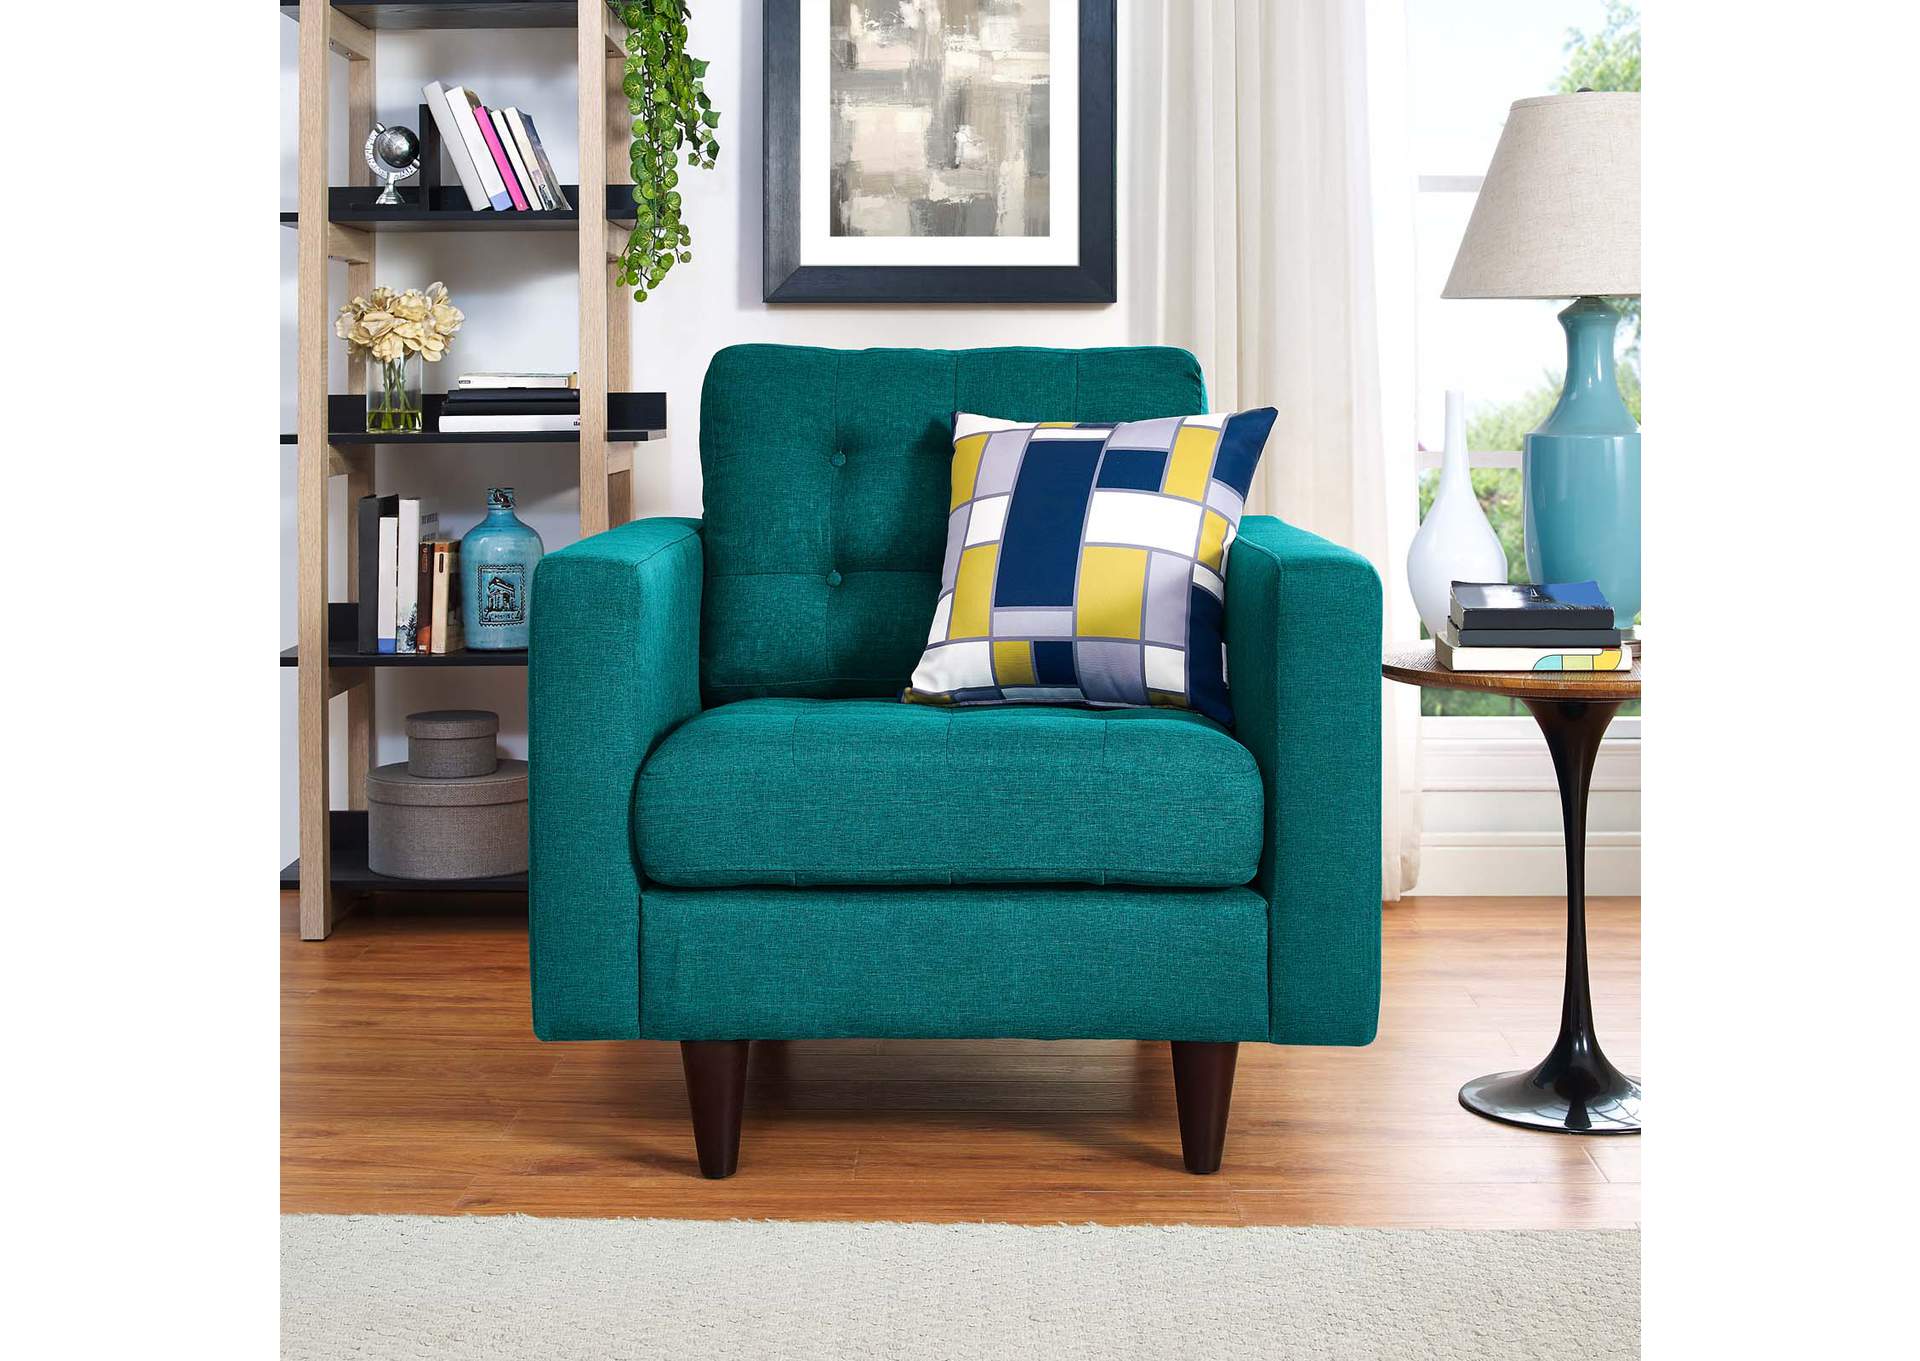 Teal Empress Upholstered Fabric Arm Chair,Modway